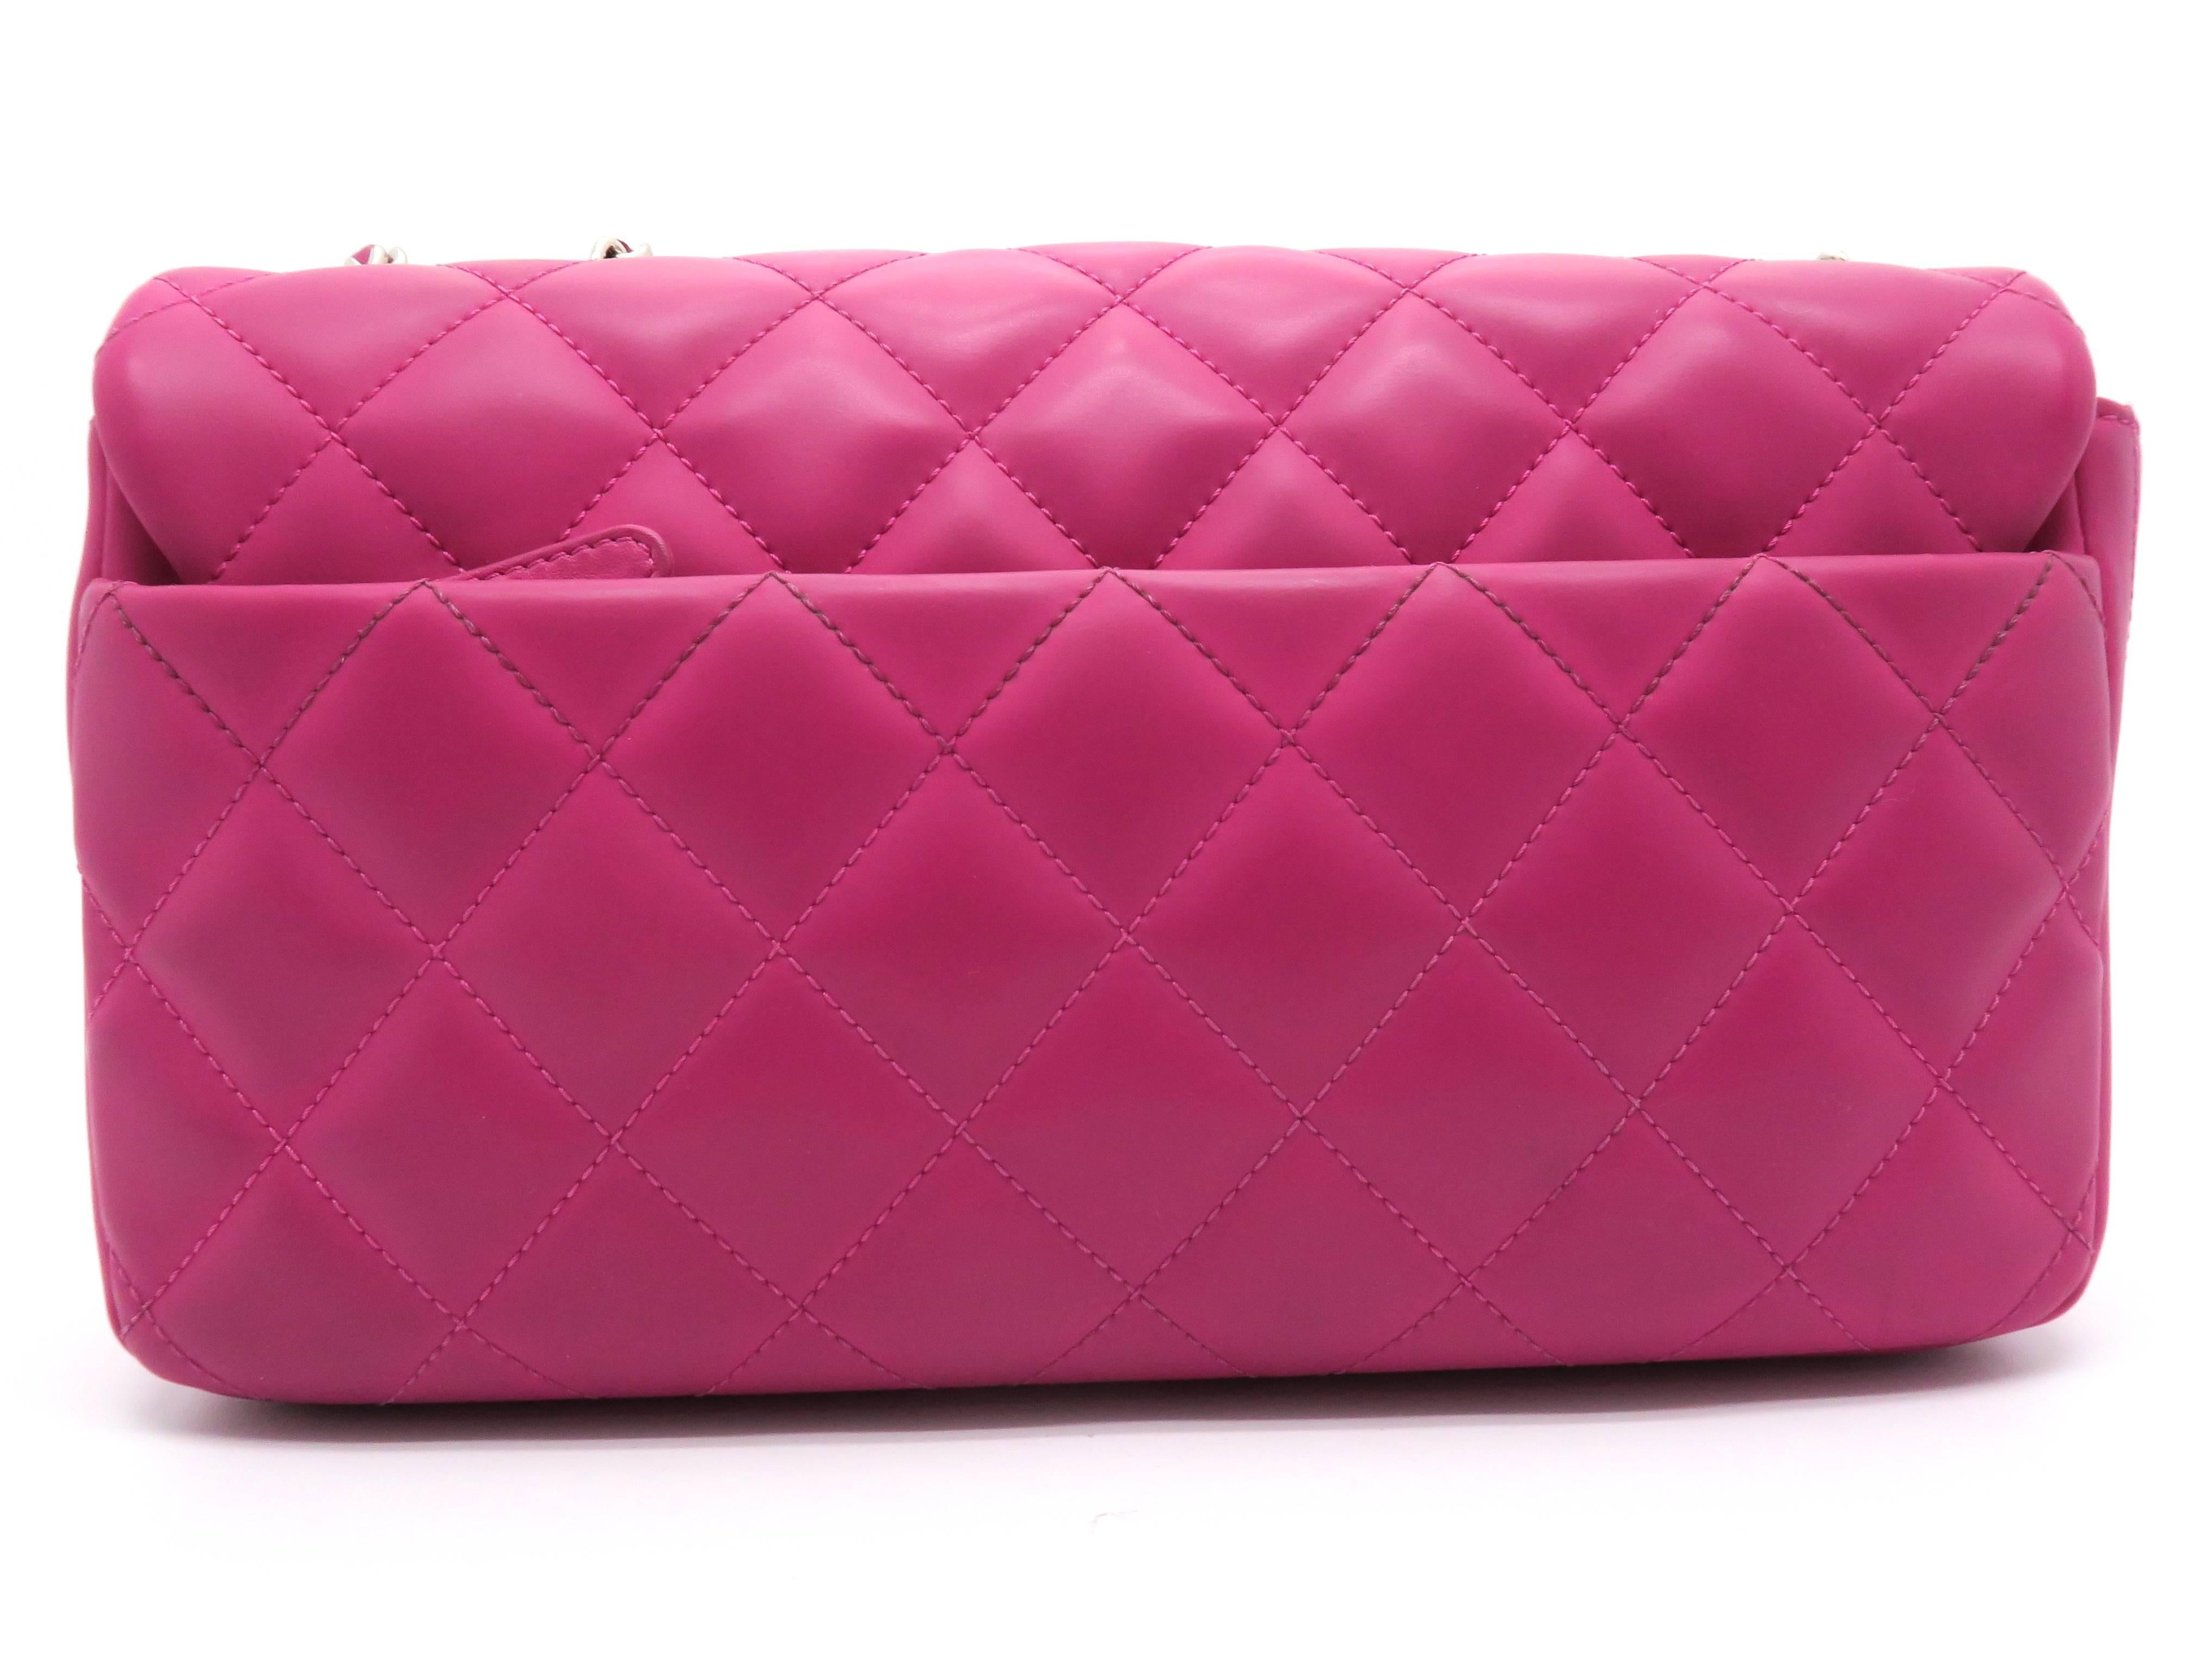 Chanel Deep Pink Quilted Coated Leather Gold Metal Chain Shoulder Flap Bag In Excellent Condition For Sale In Kowloon, HK